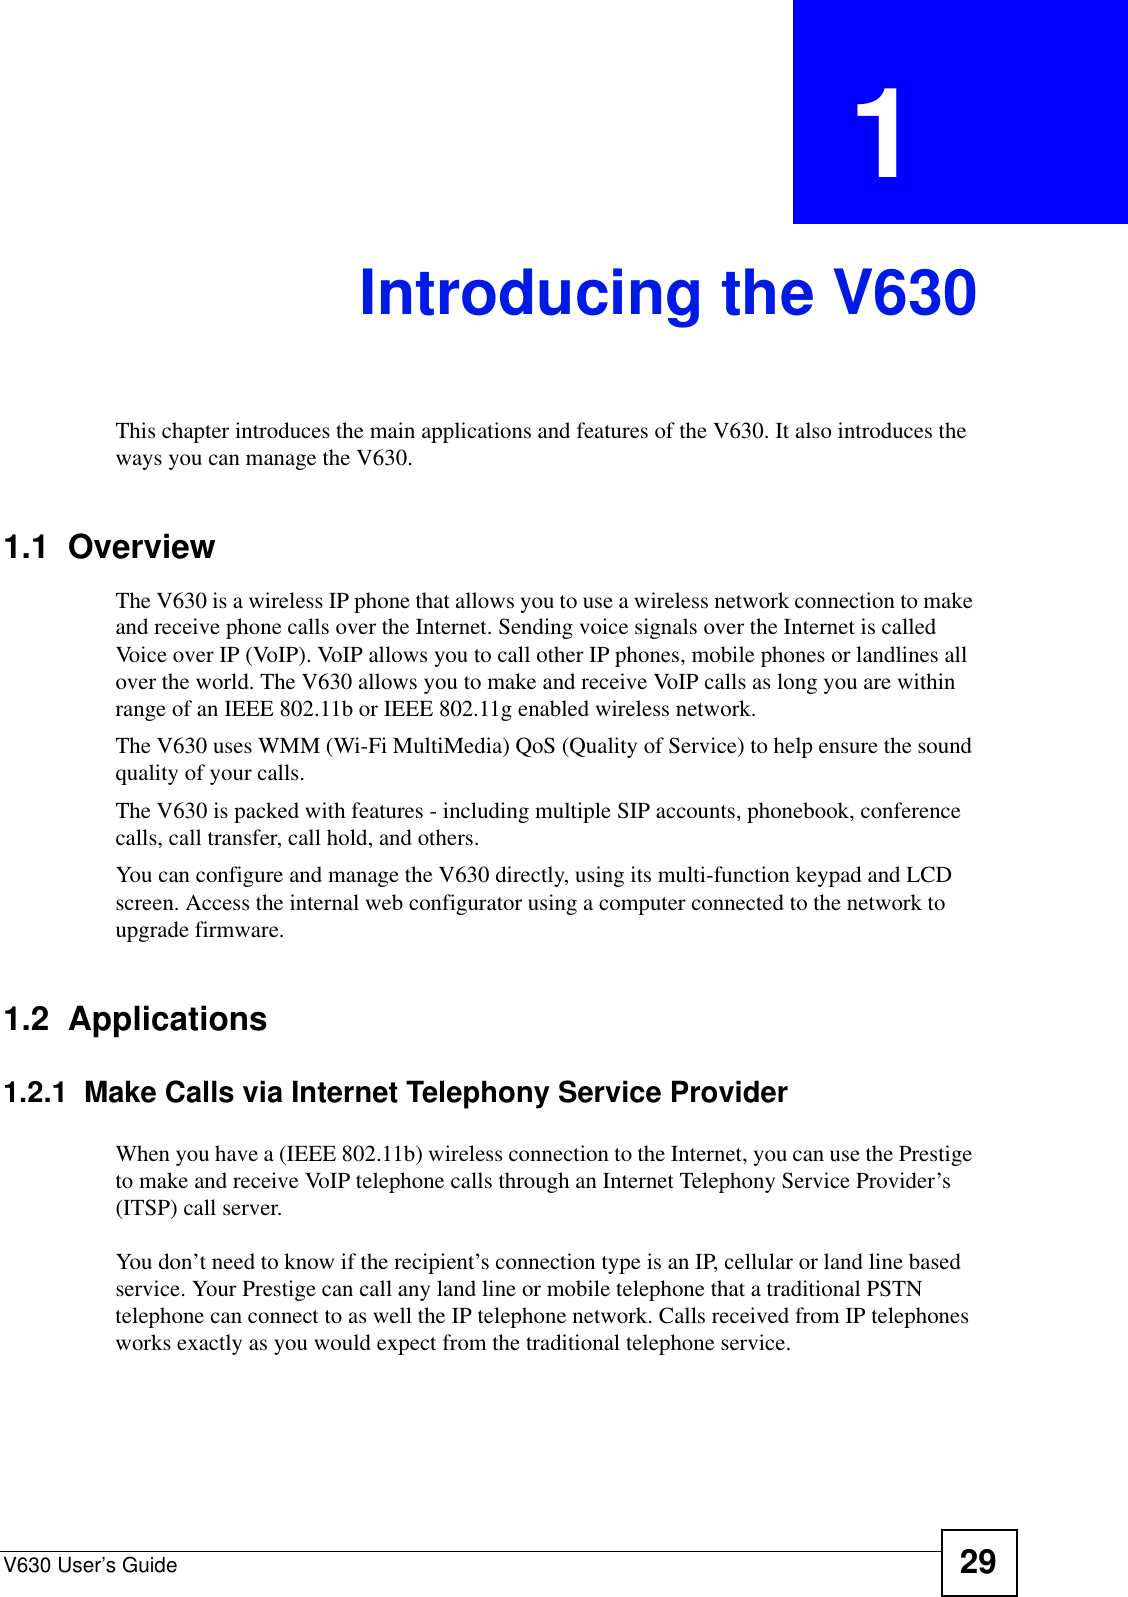 V630 User’s Guide 29CHAPTER  1 Introducing the V630This chapter introduces the main applications and features of the V630. It also introduces the ways you can manage the V630.1.1  OverviewThe V630 is a wireless IP phone that allows you to use a wireless network connection to make and receive phone calls over the Internet. Sending voice signals over the Internet is called Voice over IP (VoIP). VoIP allows you to call other IP phones, mobile phones or landlines all over the world. The V630 allows you to make and receive VoIP calls as long you are within range of an IEEE 802.11b or IEEE 802.11g enabled wireless network. The V630 uses WMM (Wi-Fi MultiMedia) QoS (Quality of Service) to help ensure the sound quality of your calls.The V630 is packed with features - including multiple SIP accounts, phonebook, conference calls, call transfer, call hold, and others.You can configure and manage the V630 directly, using its multi-function keypad and LCD screen. Access the internal web configurator using a computer connected to the network to upgrade firmware.1.2  Applications1.2.1  Make Calls via Internet Telephony Service ProviderWhen you have a (IEEE 802.11b) wireless connection to the Internet, you can use the Prestige to make and receive VoIP telephone calls through an Internet Telephony Service Provider’s (ITSP) call server. You don’t need to know if the recipient’s connection type is an IP, cellular or land line based service. Your Prestige can call any land line or mobile telephone that a traditional PSTN telephone can connect to as well the IP telephone network. Calls received from IP telephones works exactly as you would expect from the traditional telephone service.